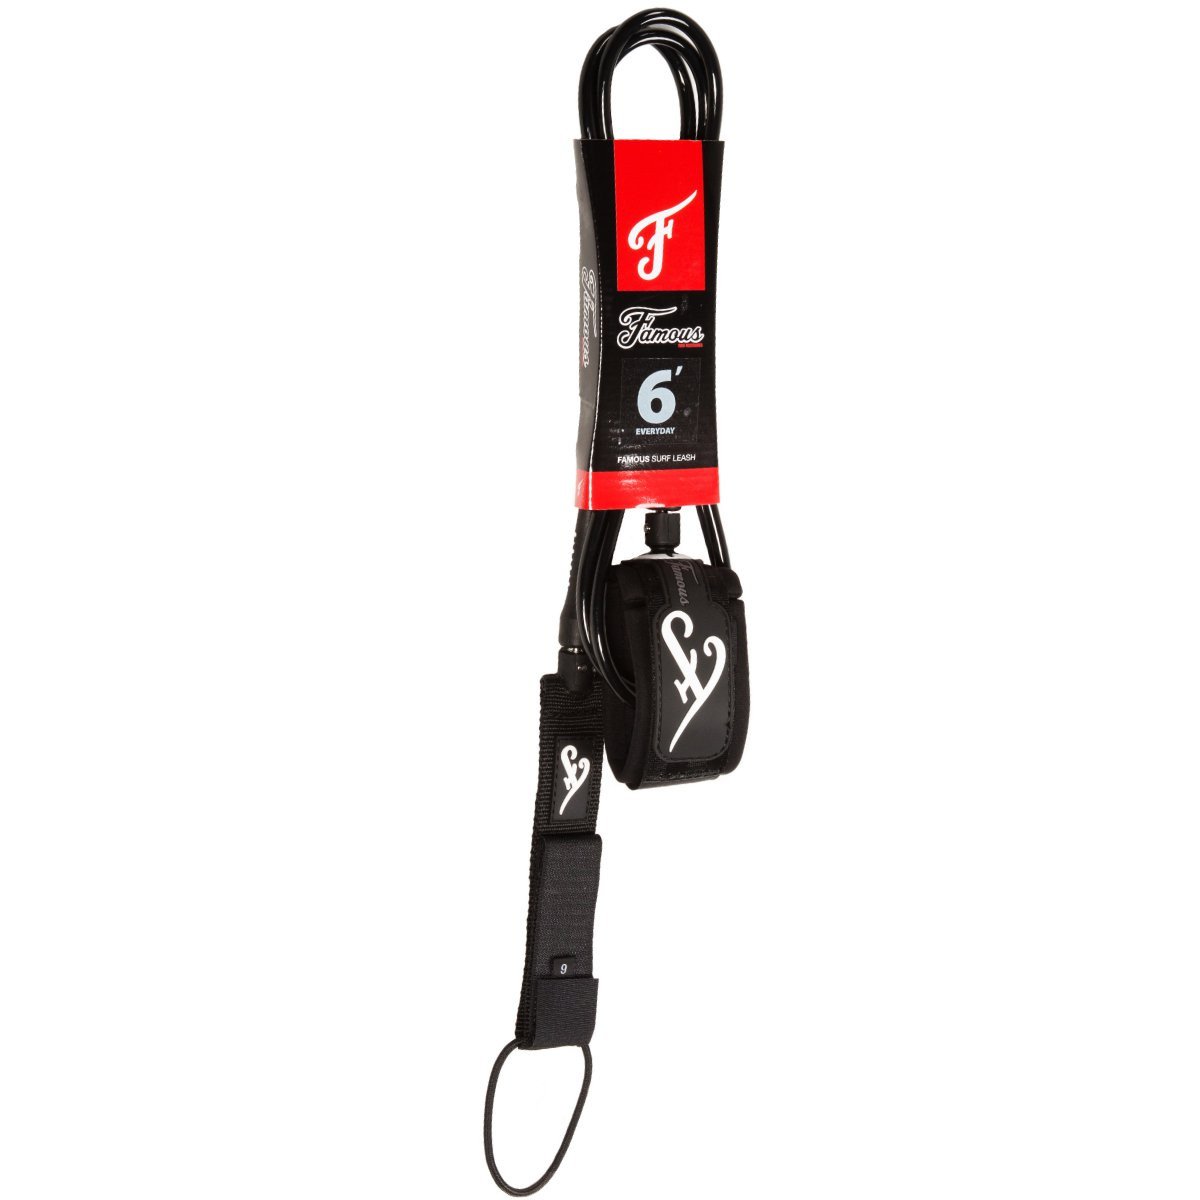 Famous Deluxe 9'0 Everyday Leash